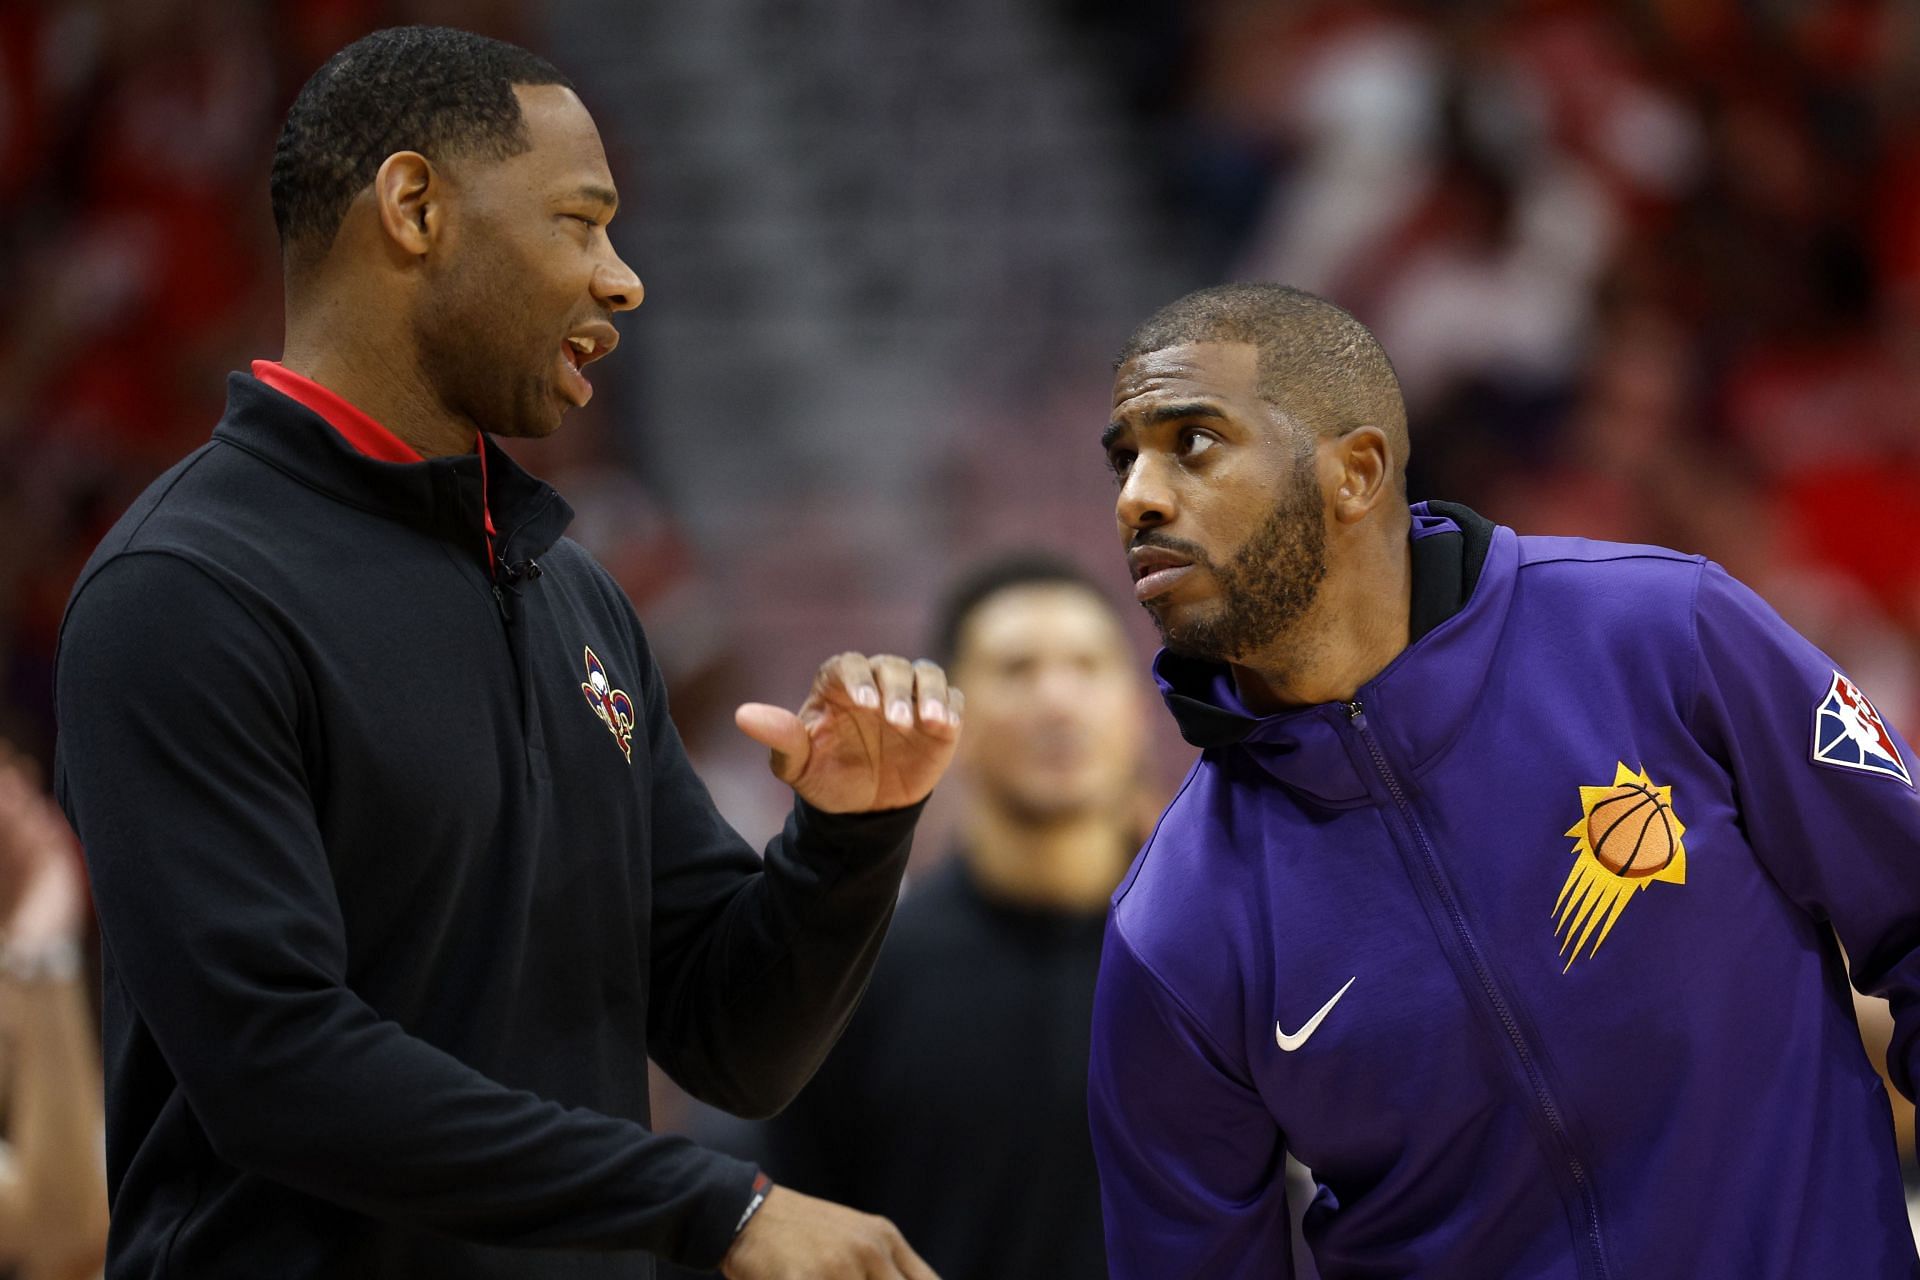 Chris Paul and Willie Green during the Phoenix Suns vs. New Orleans Pelicans &mdash; Game 6